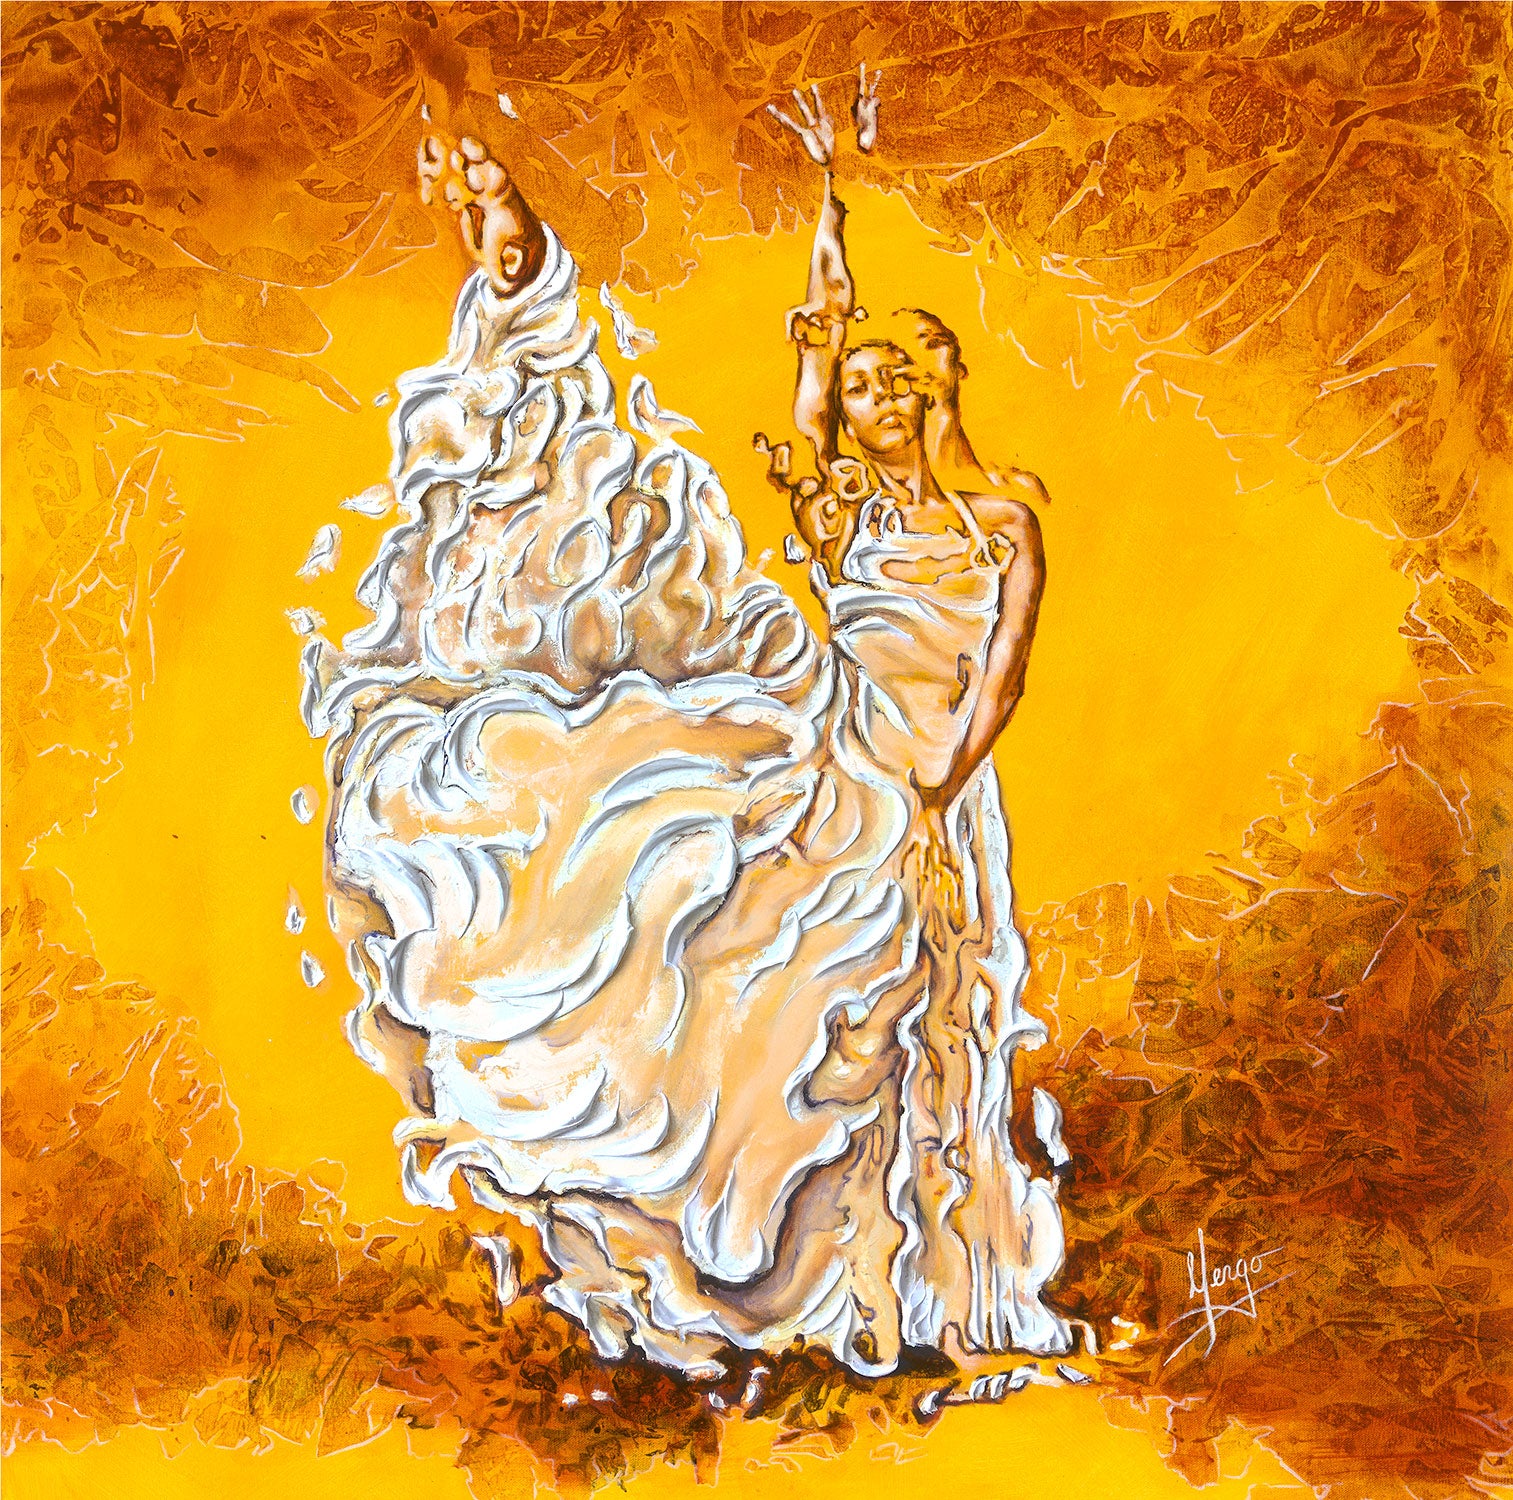 "Let it be peace in my soul" dancer with white dress painting embellished